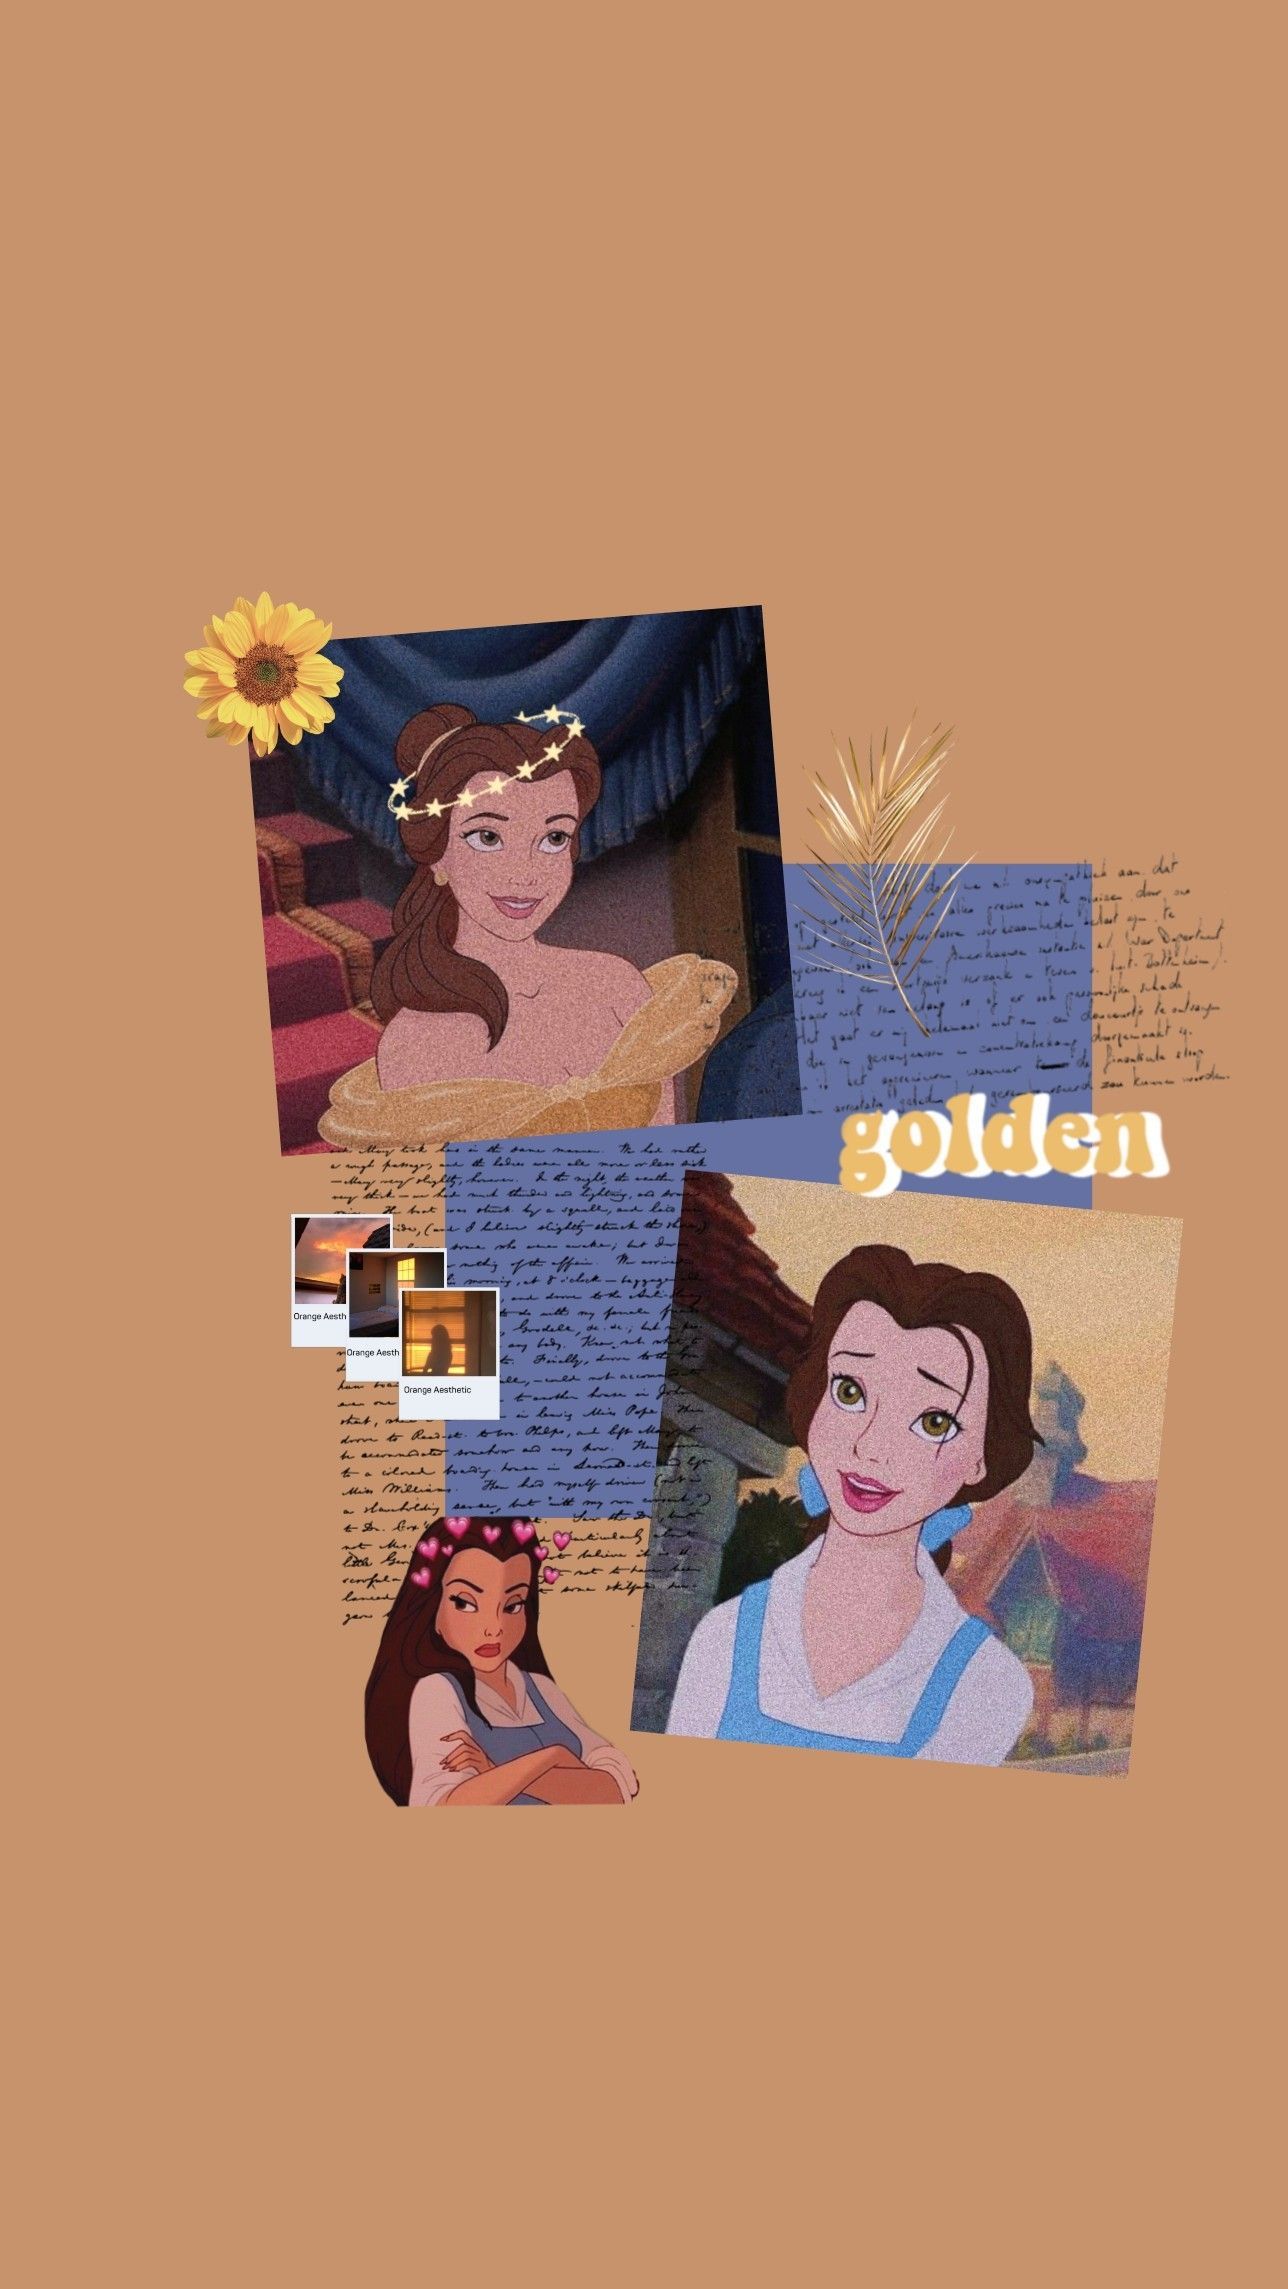 Aesthetic Disney wallpaper for phone with Belle from Beauty and the Beast - Disney, profile picture, princess, Ariel, Belle